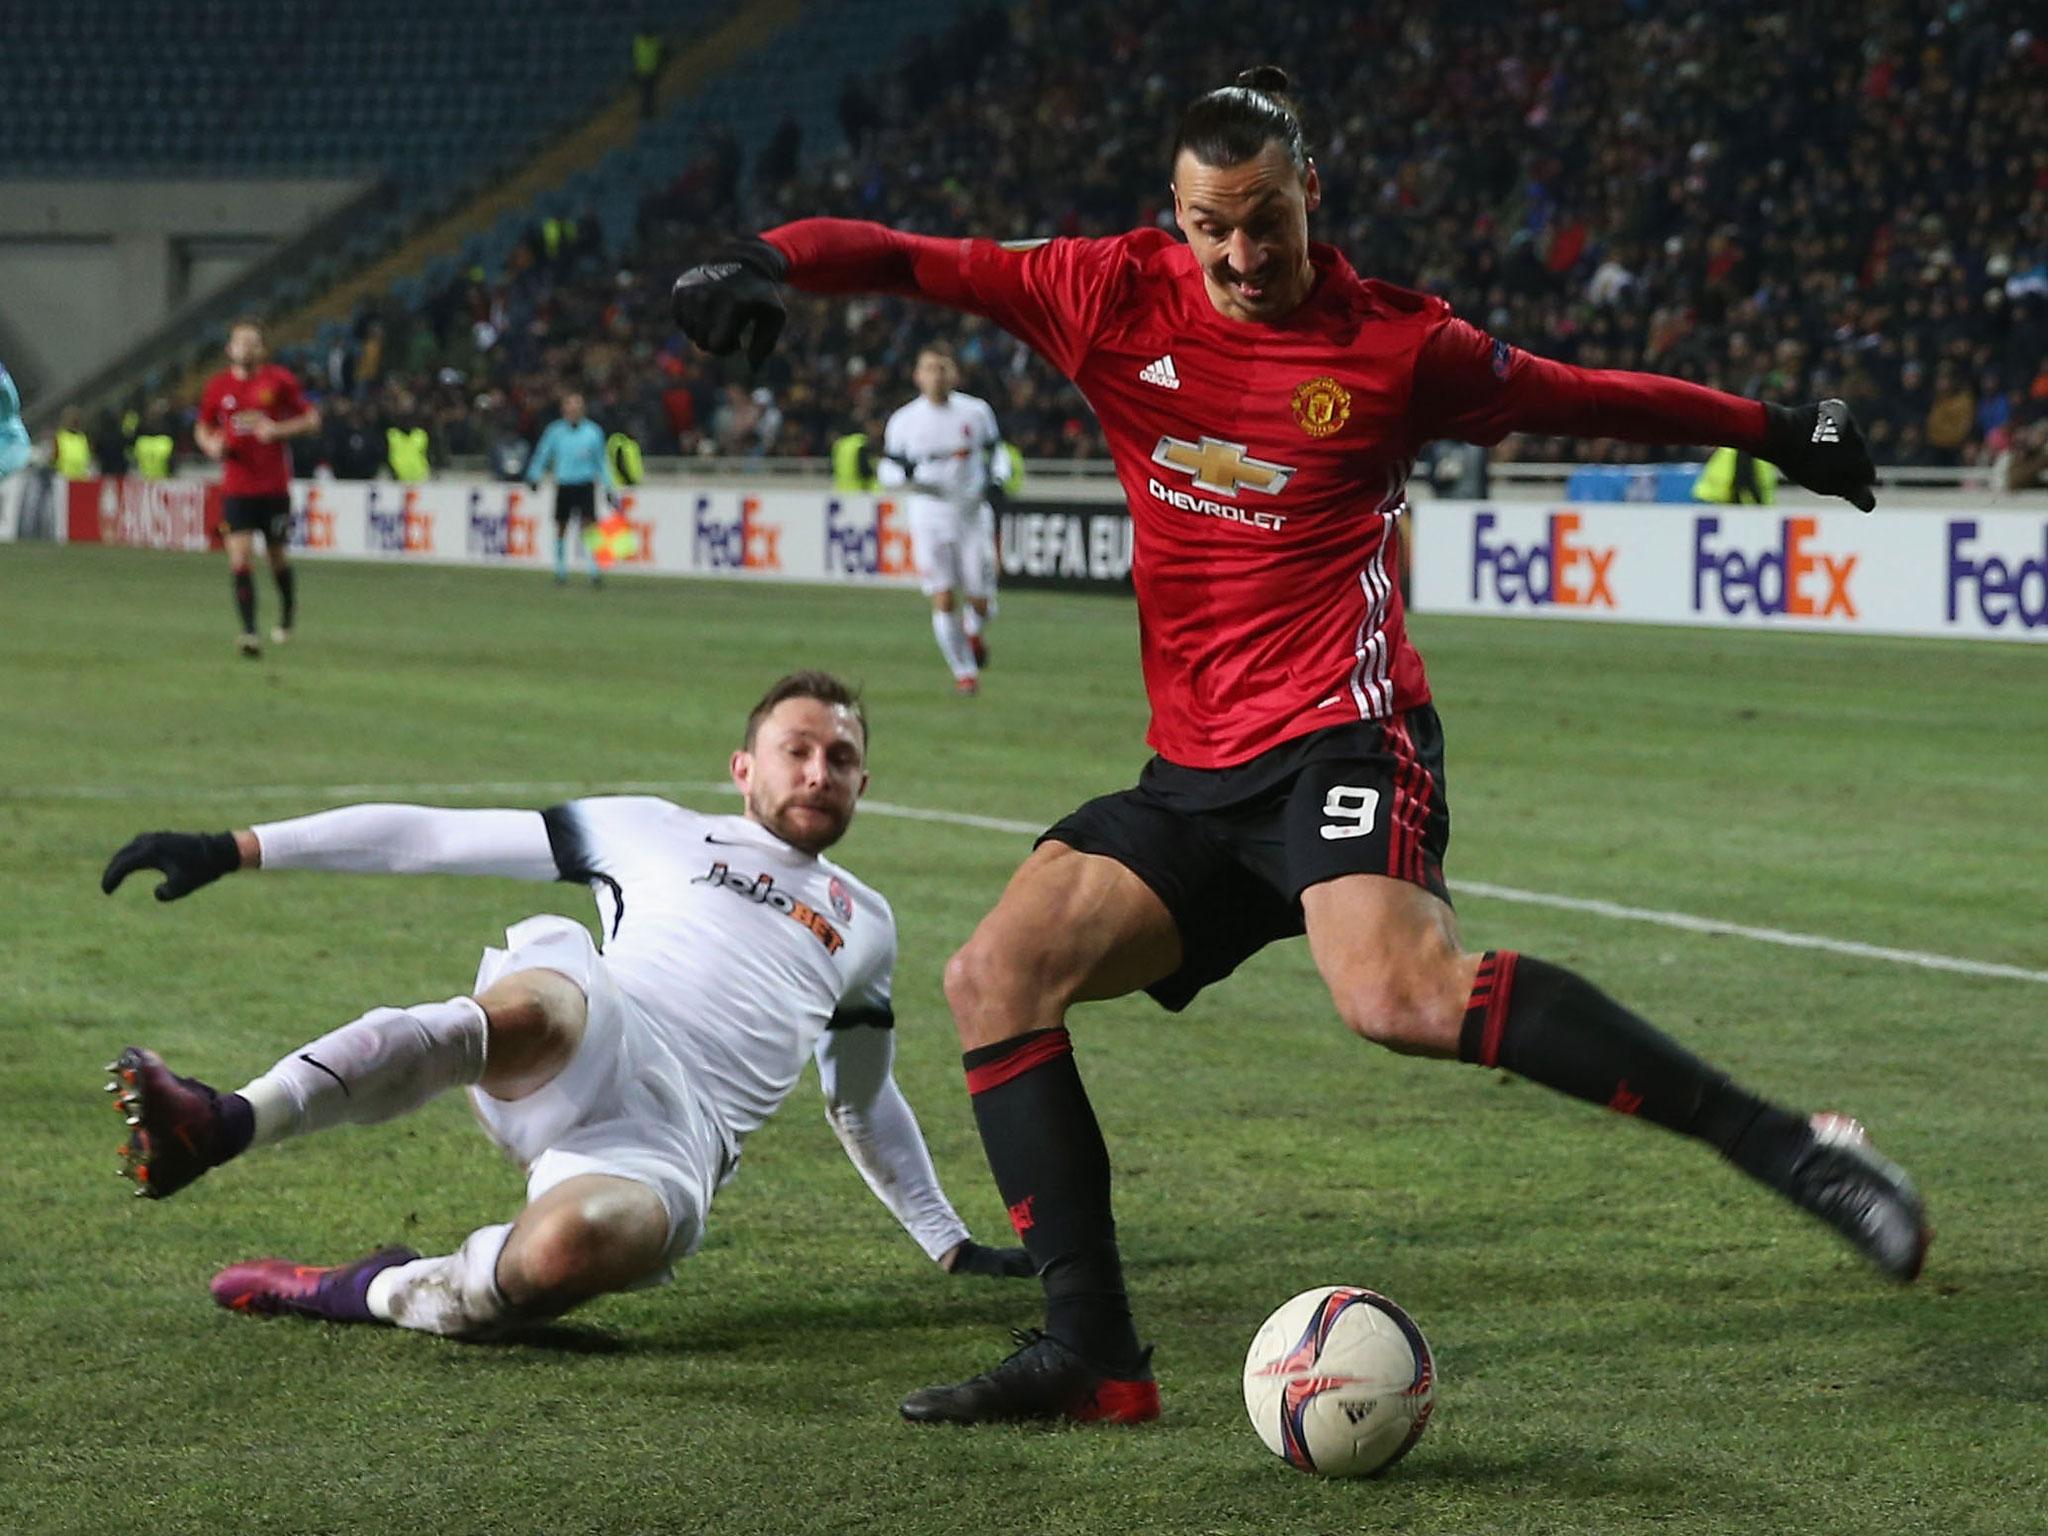 Ibrahimovic scored late on to secure qualification in Odessa